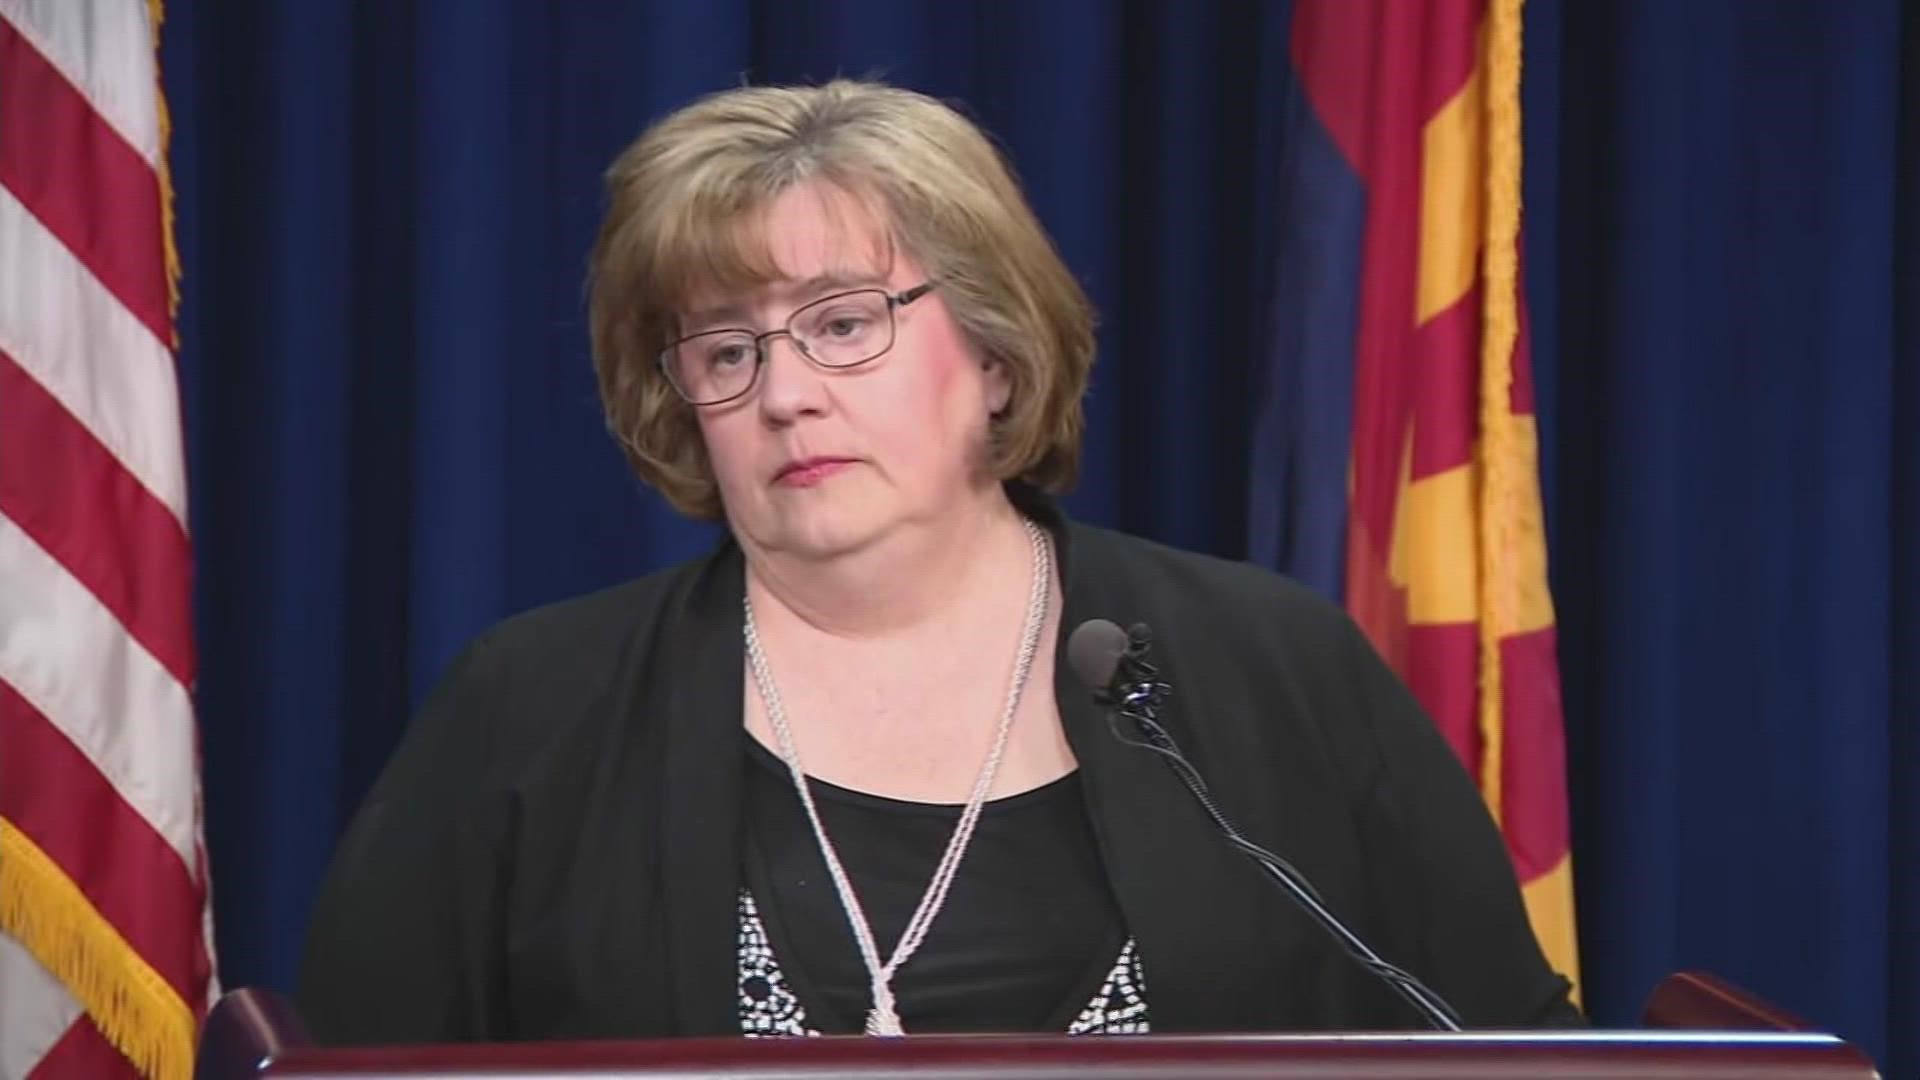 Maricopa County Attorney Rachel Mitchell says she'll be working with the attorney general's office throughout the review process.